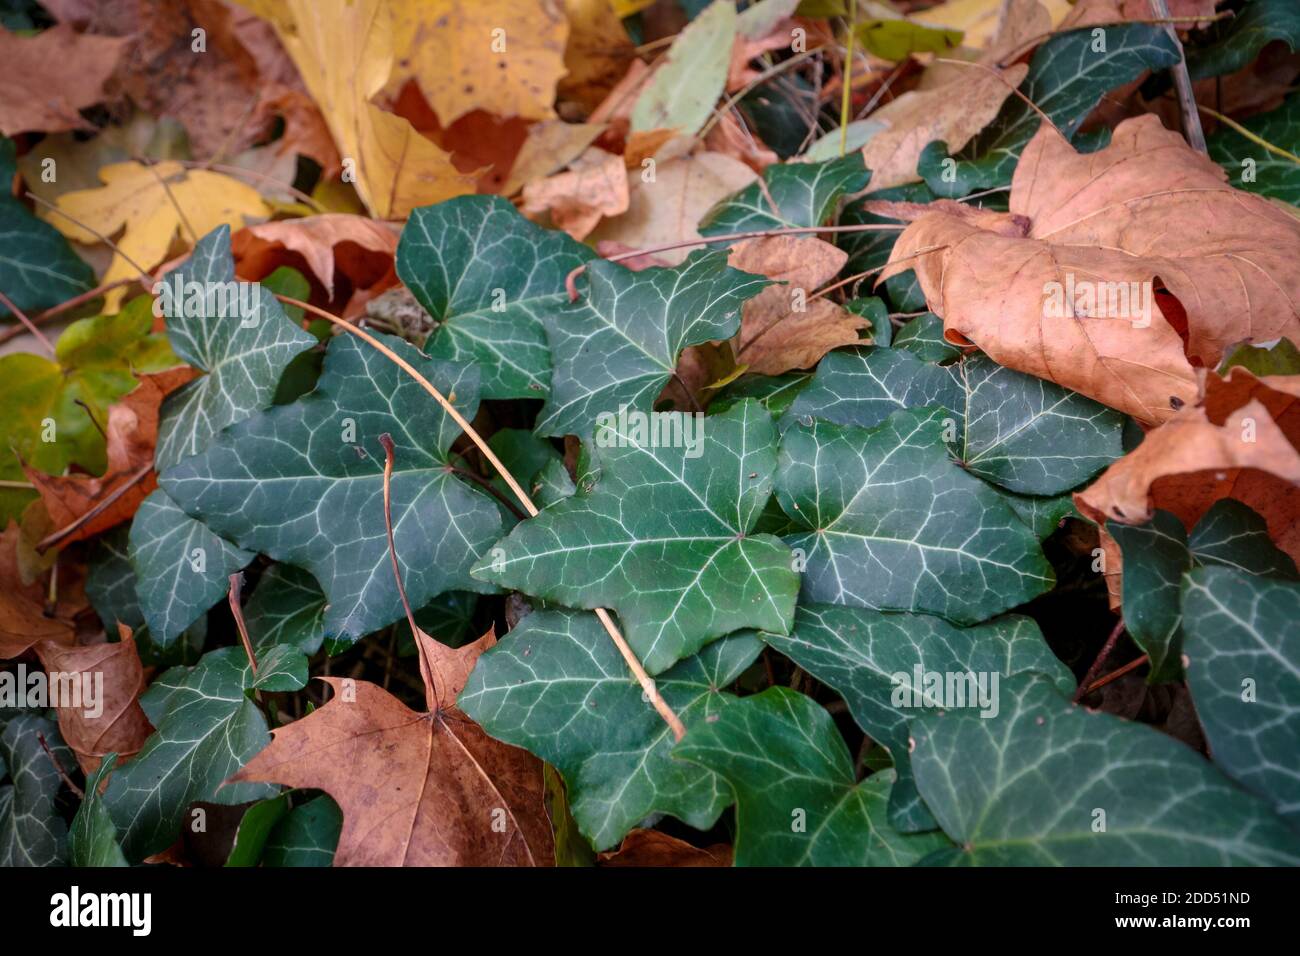 Autumn leaves on evergreen Common Ivy (lat.: Hedera helix) vines. Stock Photo